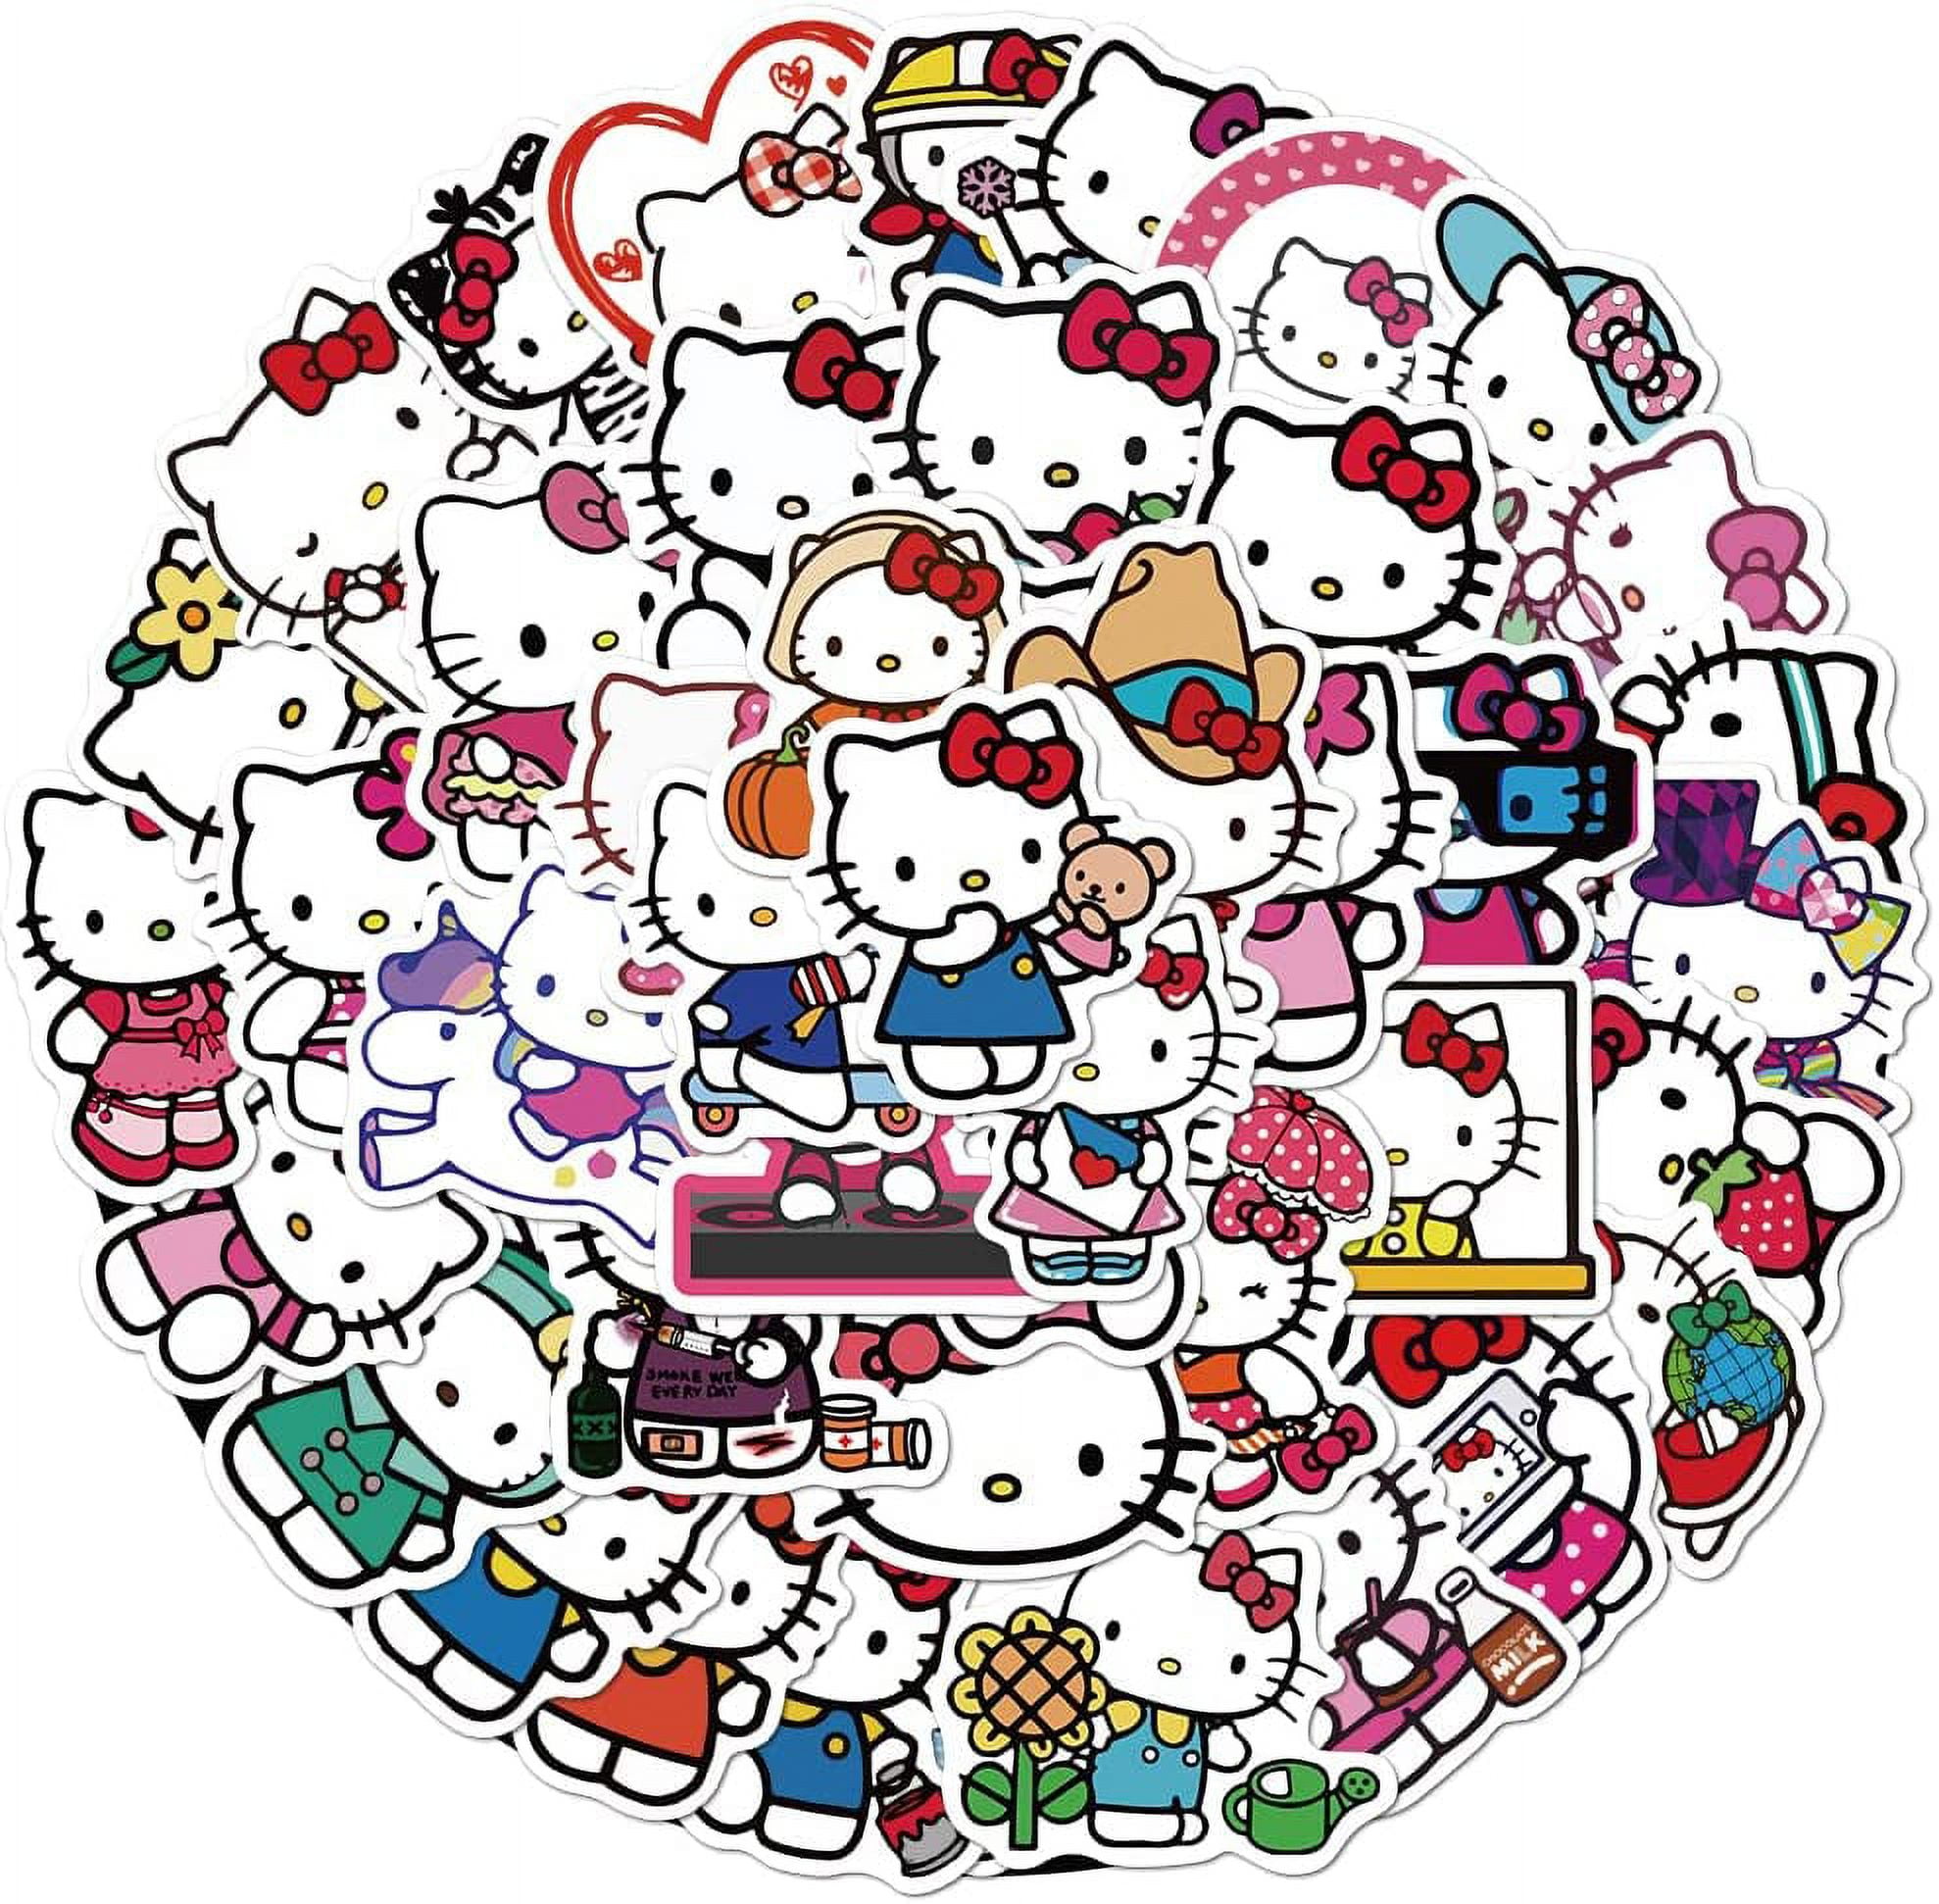 50pcs Kuromi Stickers for Laptop and Computer, Anime Cartoon Waterproof Vinyl Stickers for Water Bottle Car Bumper Luggage,Cute Graffiti Decals for